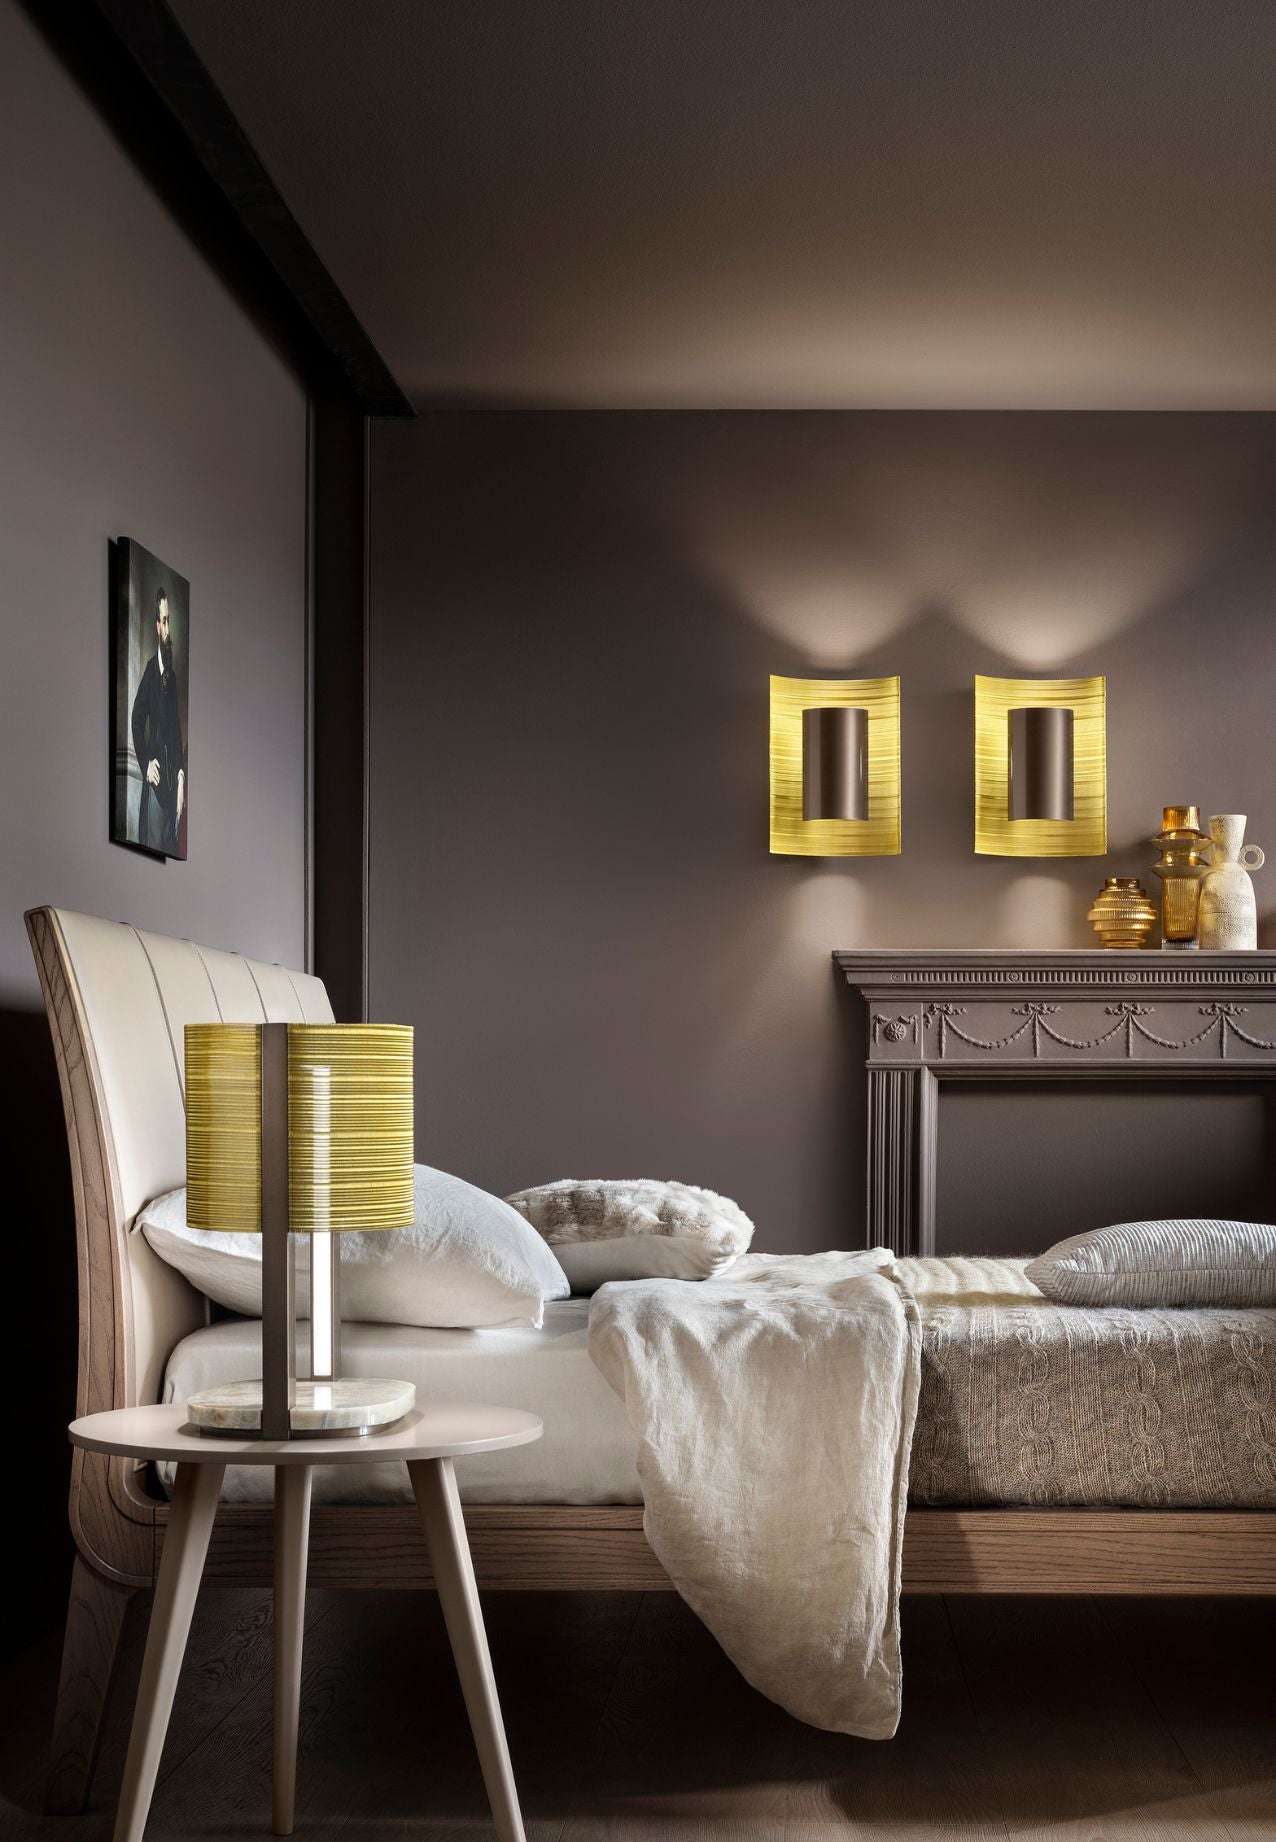 Ebe Table Lamp & Wall Lamp in Luxury Bed room from Masiero Dimore Collection - Luxury Decorative Lighting available at Spacio India